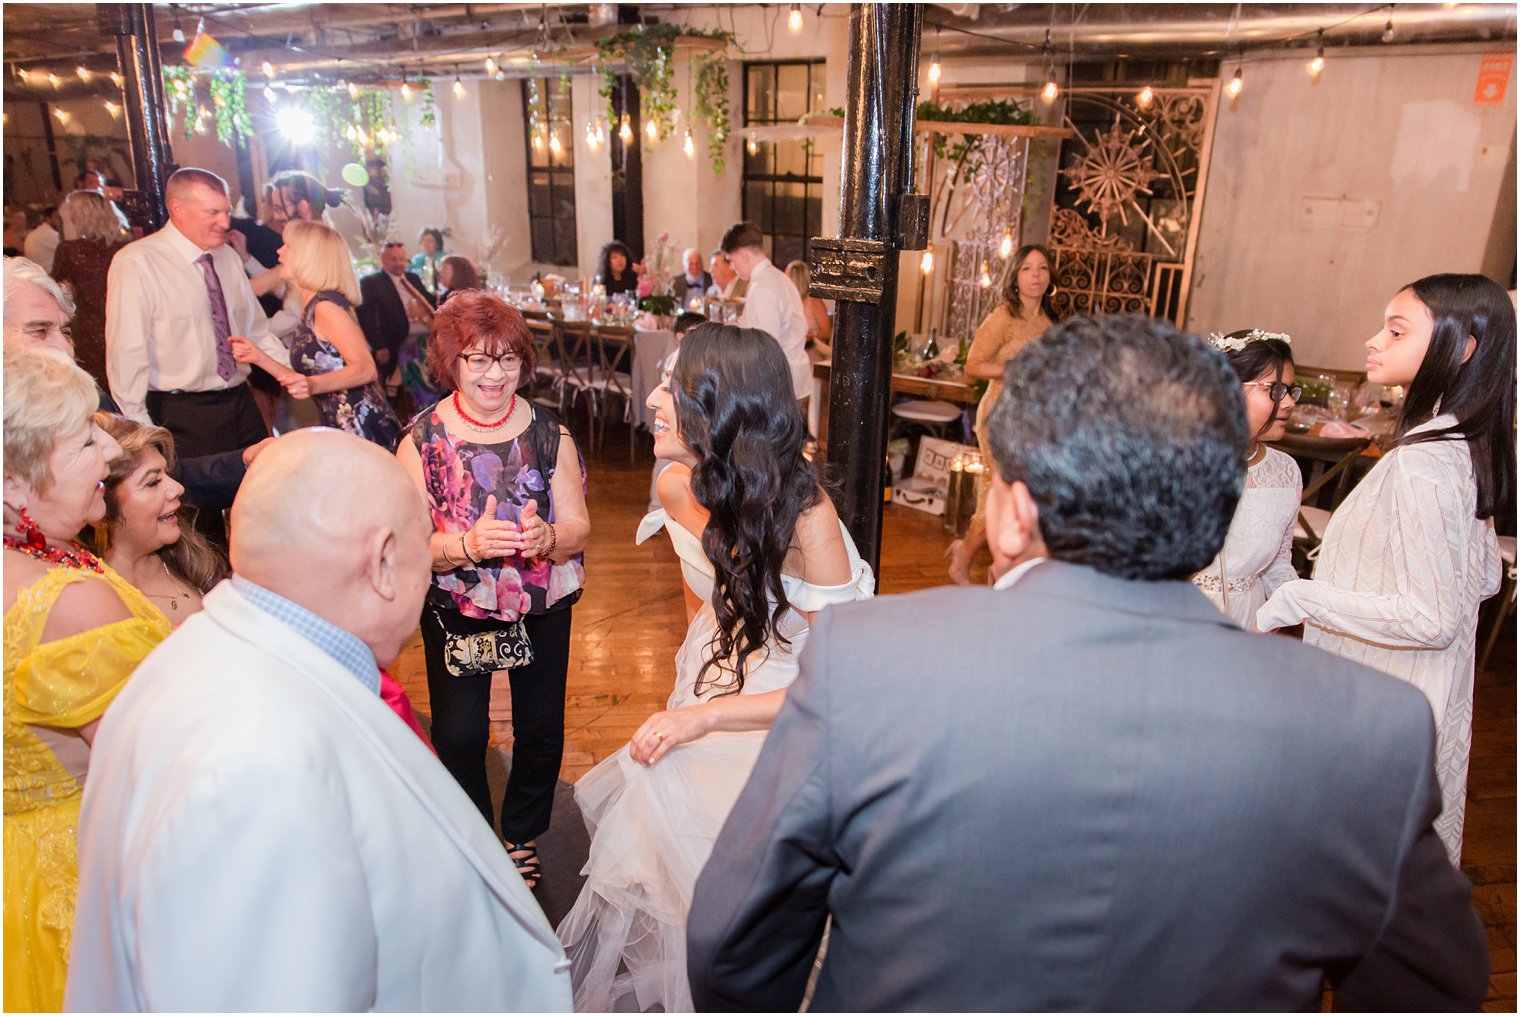 Reception dancing photos for industrial chic wedding at Art Factory Studios in Paterson NJ